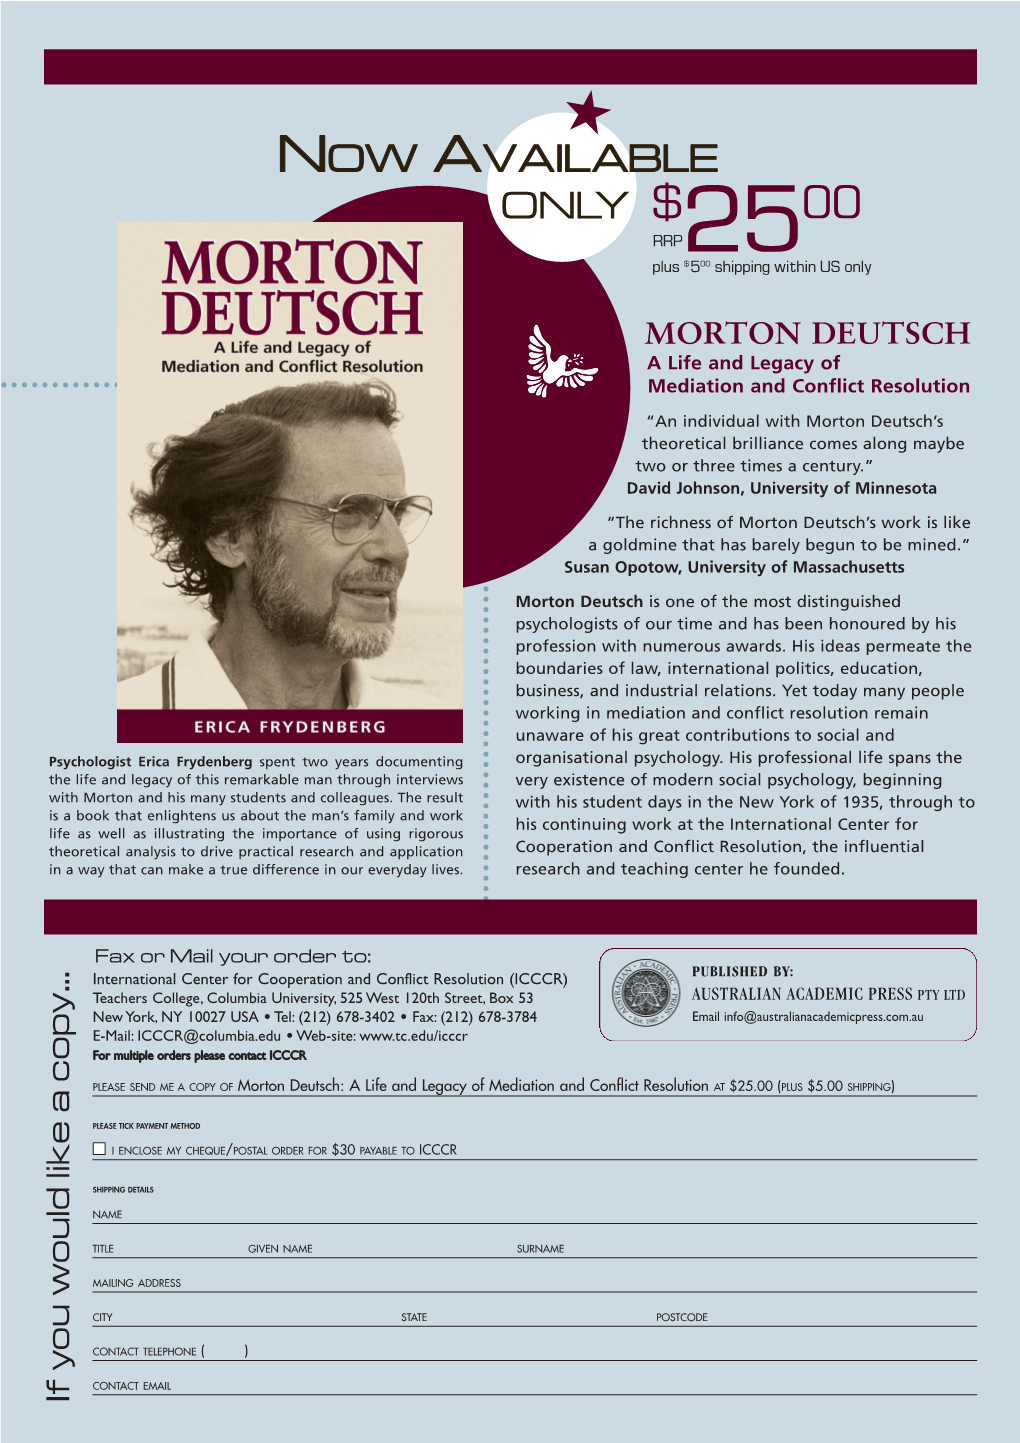 MORTON DEUTSCH a Life and Legacy of Mediation and Conflict Resolution